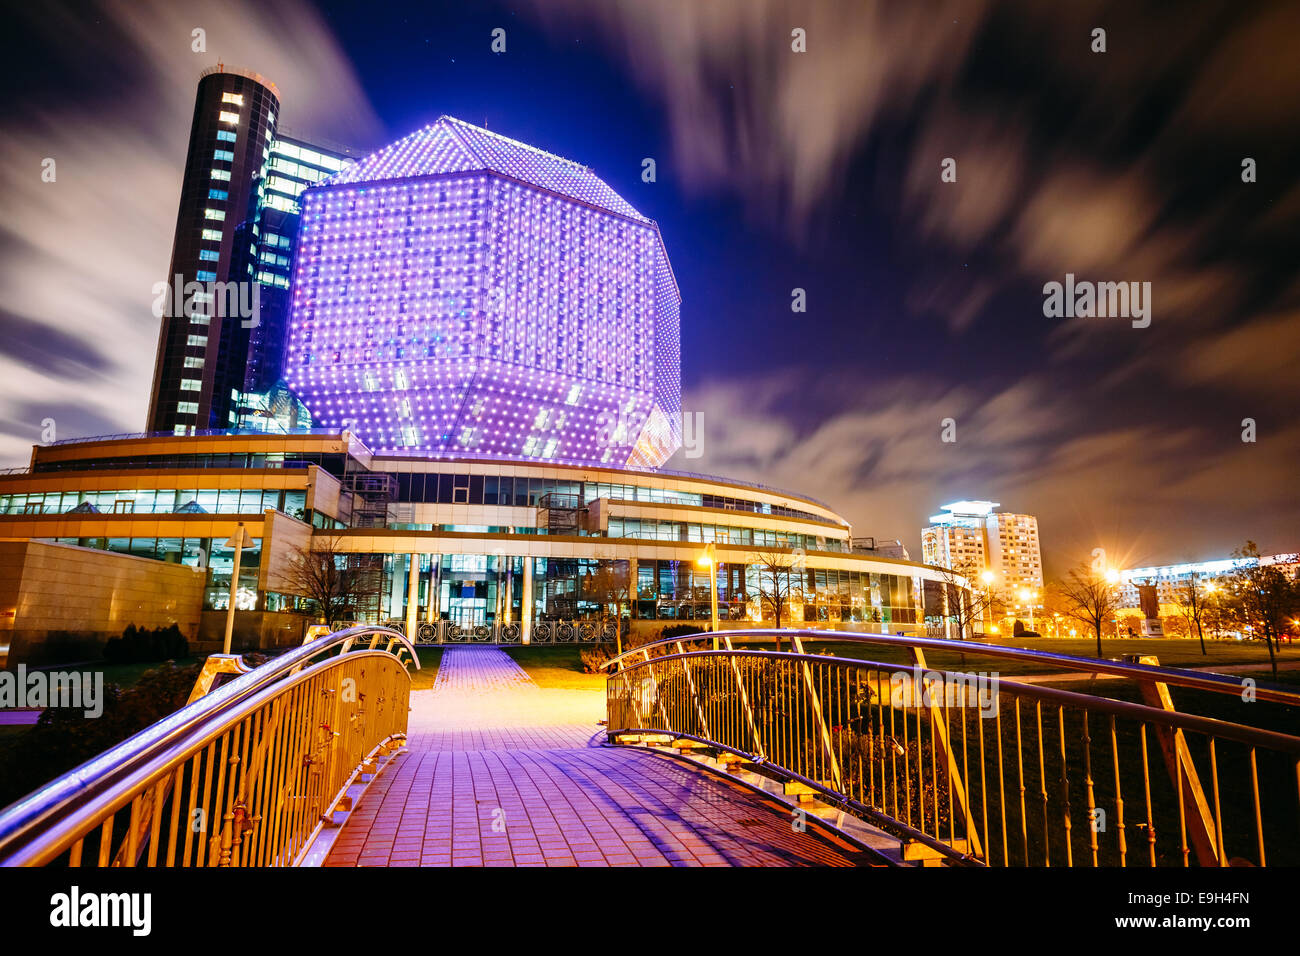 Unique Building Of National Library Of Belarus In Minsk At Night Scene. Building Has 23 Floors And Is 72-metre High. Stock Photo